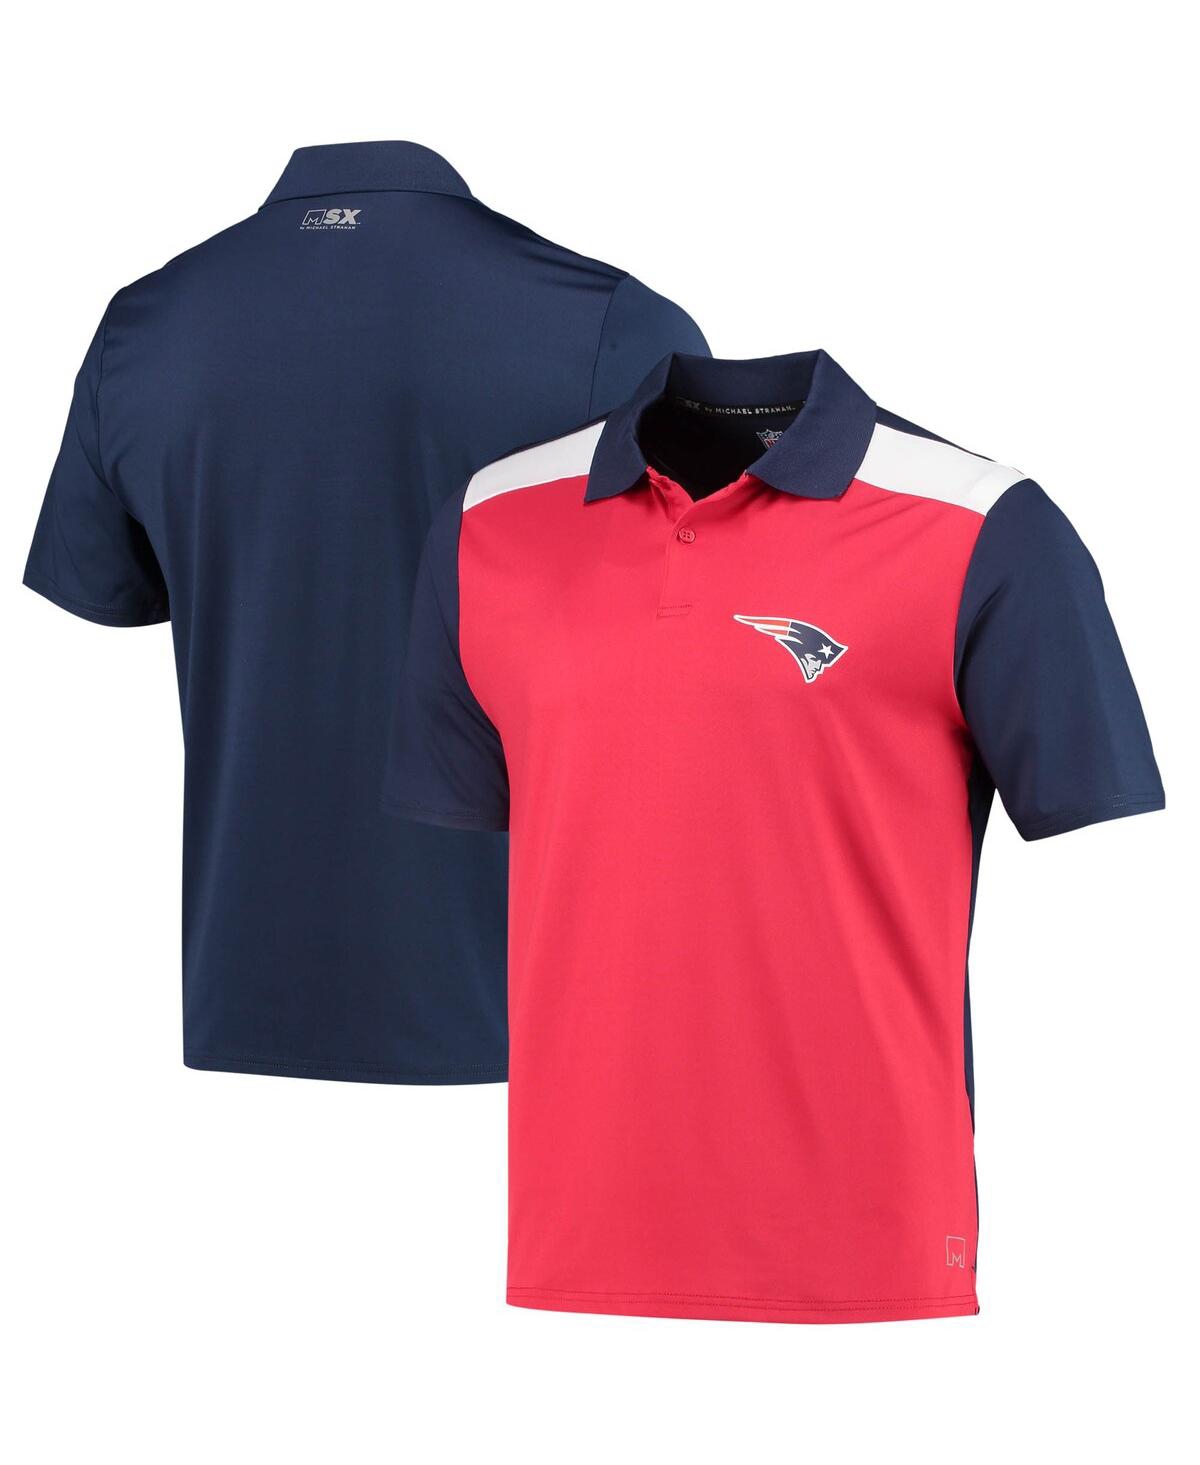 Msx By Michael Strahan Men's  Red, Navy New England Patriots Challenge Color Block Performance Polo S In Red,navy